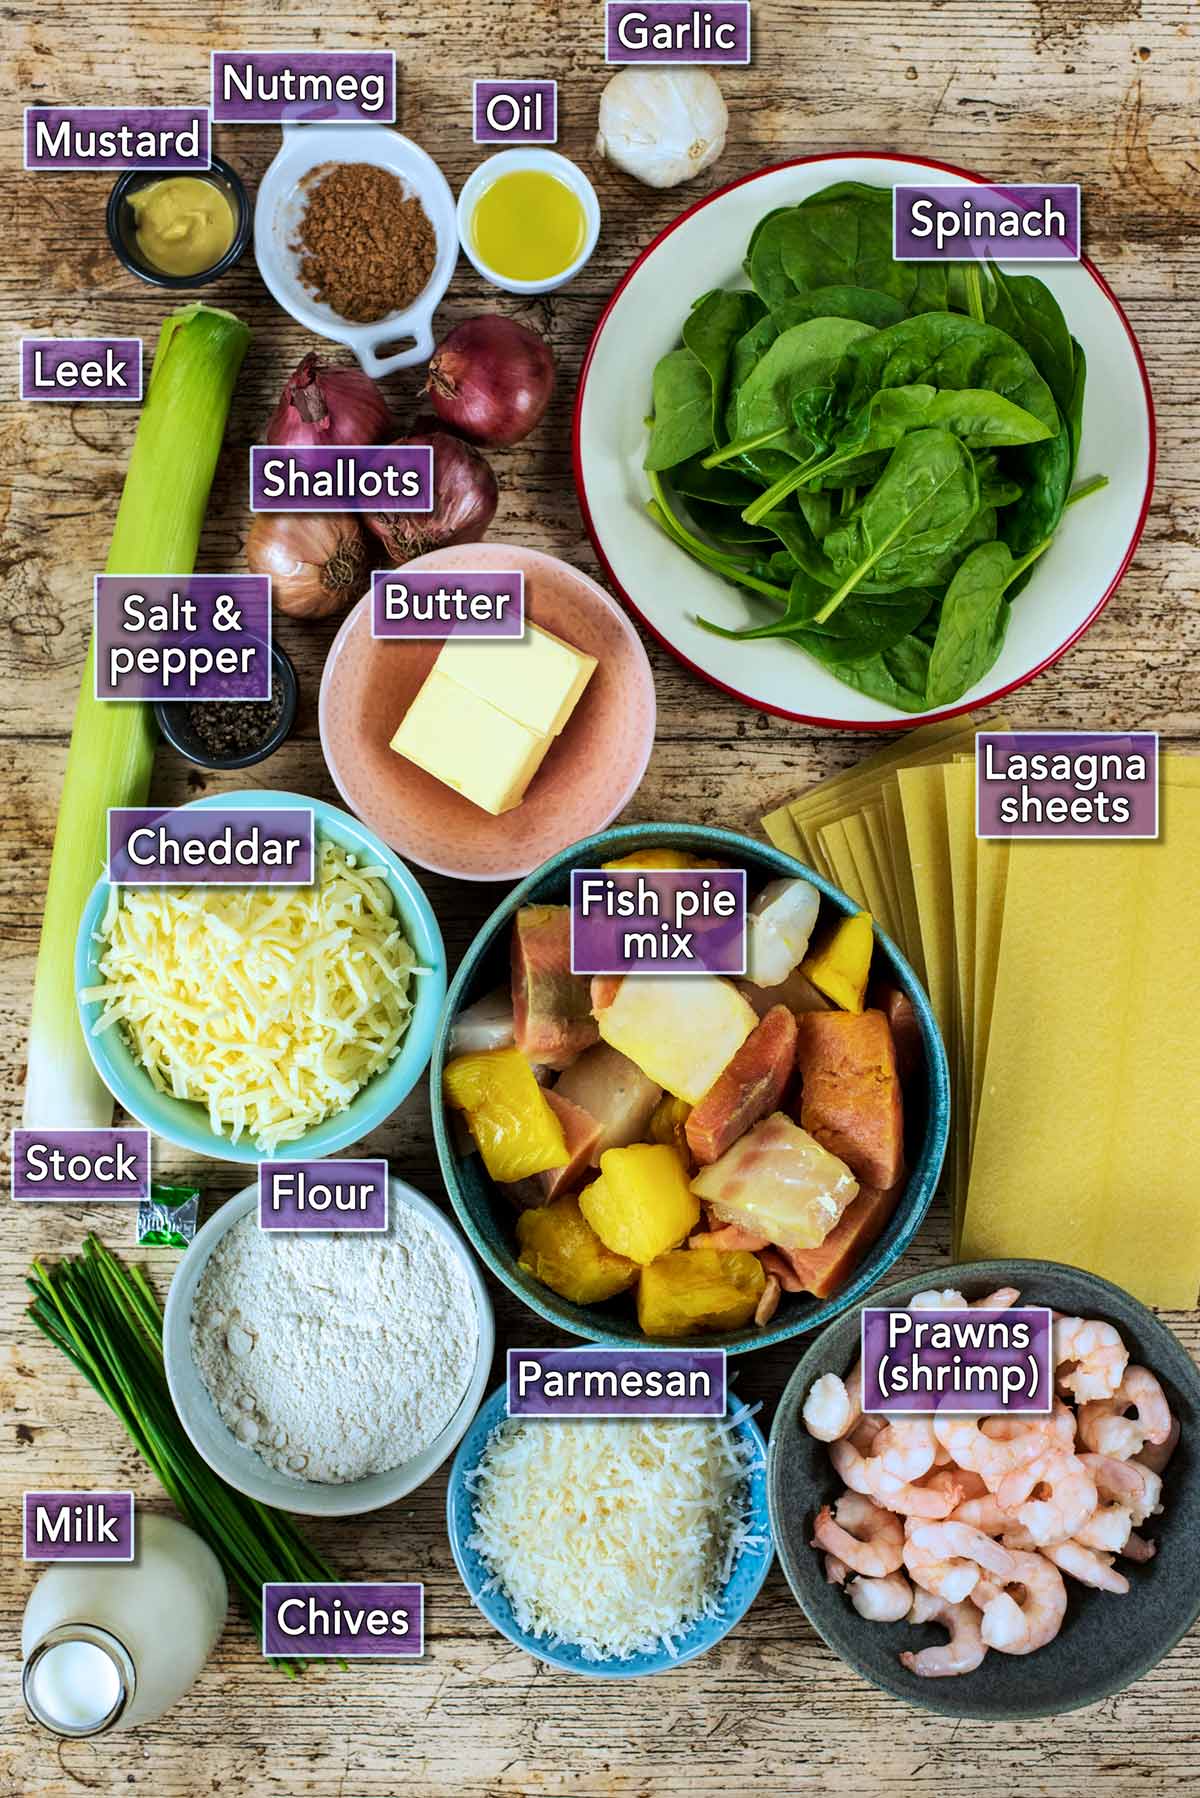 All the ingredients needs to make this recipe each with text overlay labels.